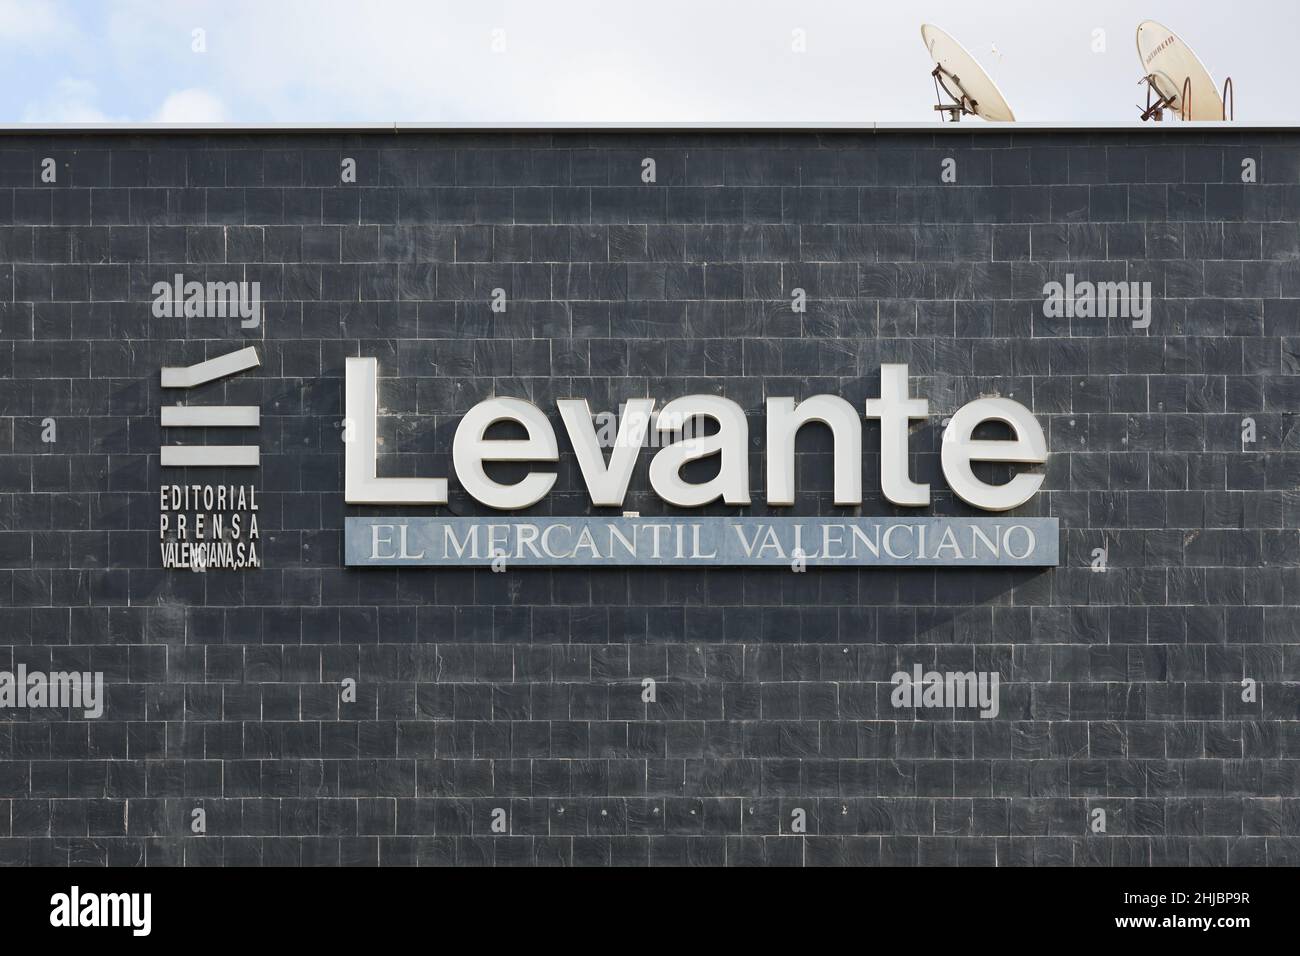 VALENCIA, SPAIN - JANUARY 13, 2022: Levante is a Spanish newspaper published in the city of Valencia originally founded in 1872 Stock Photo